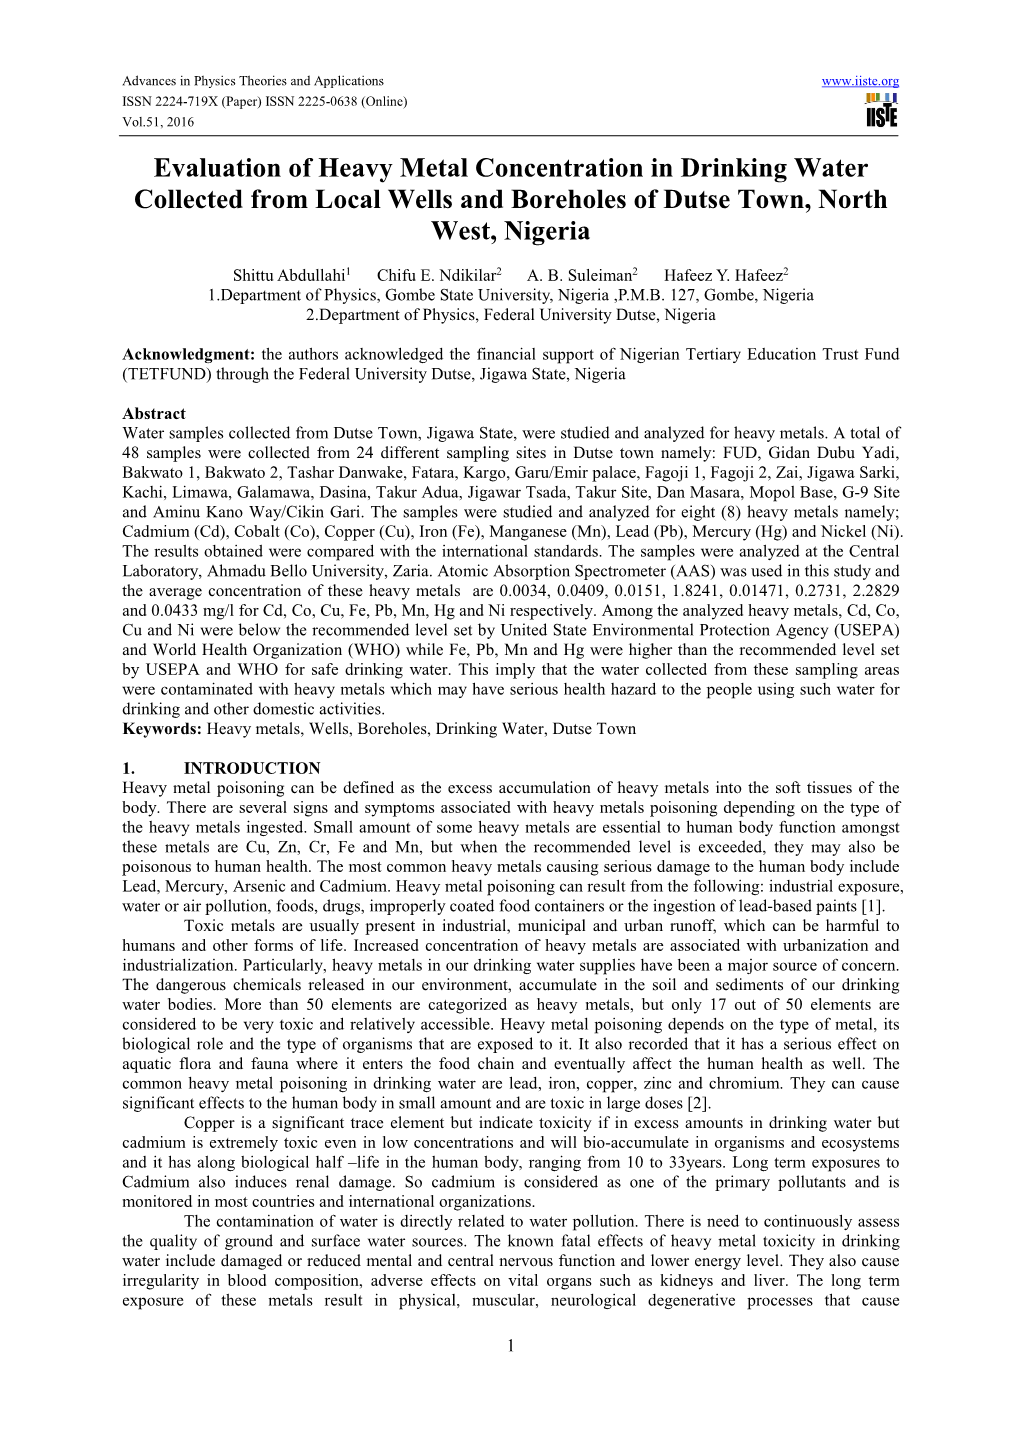 Evaluation of Heavy Metal Concentration in Drinking Water Collected from Local Wells and Boreholes of Dutse Town, North West, Nigeria